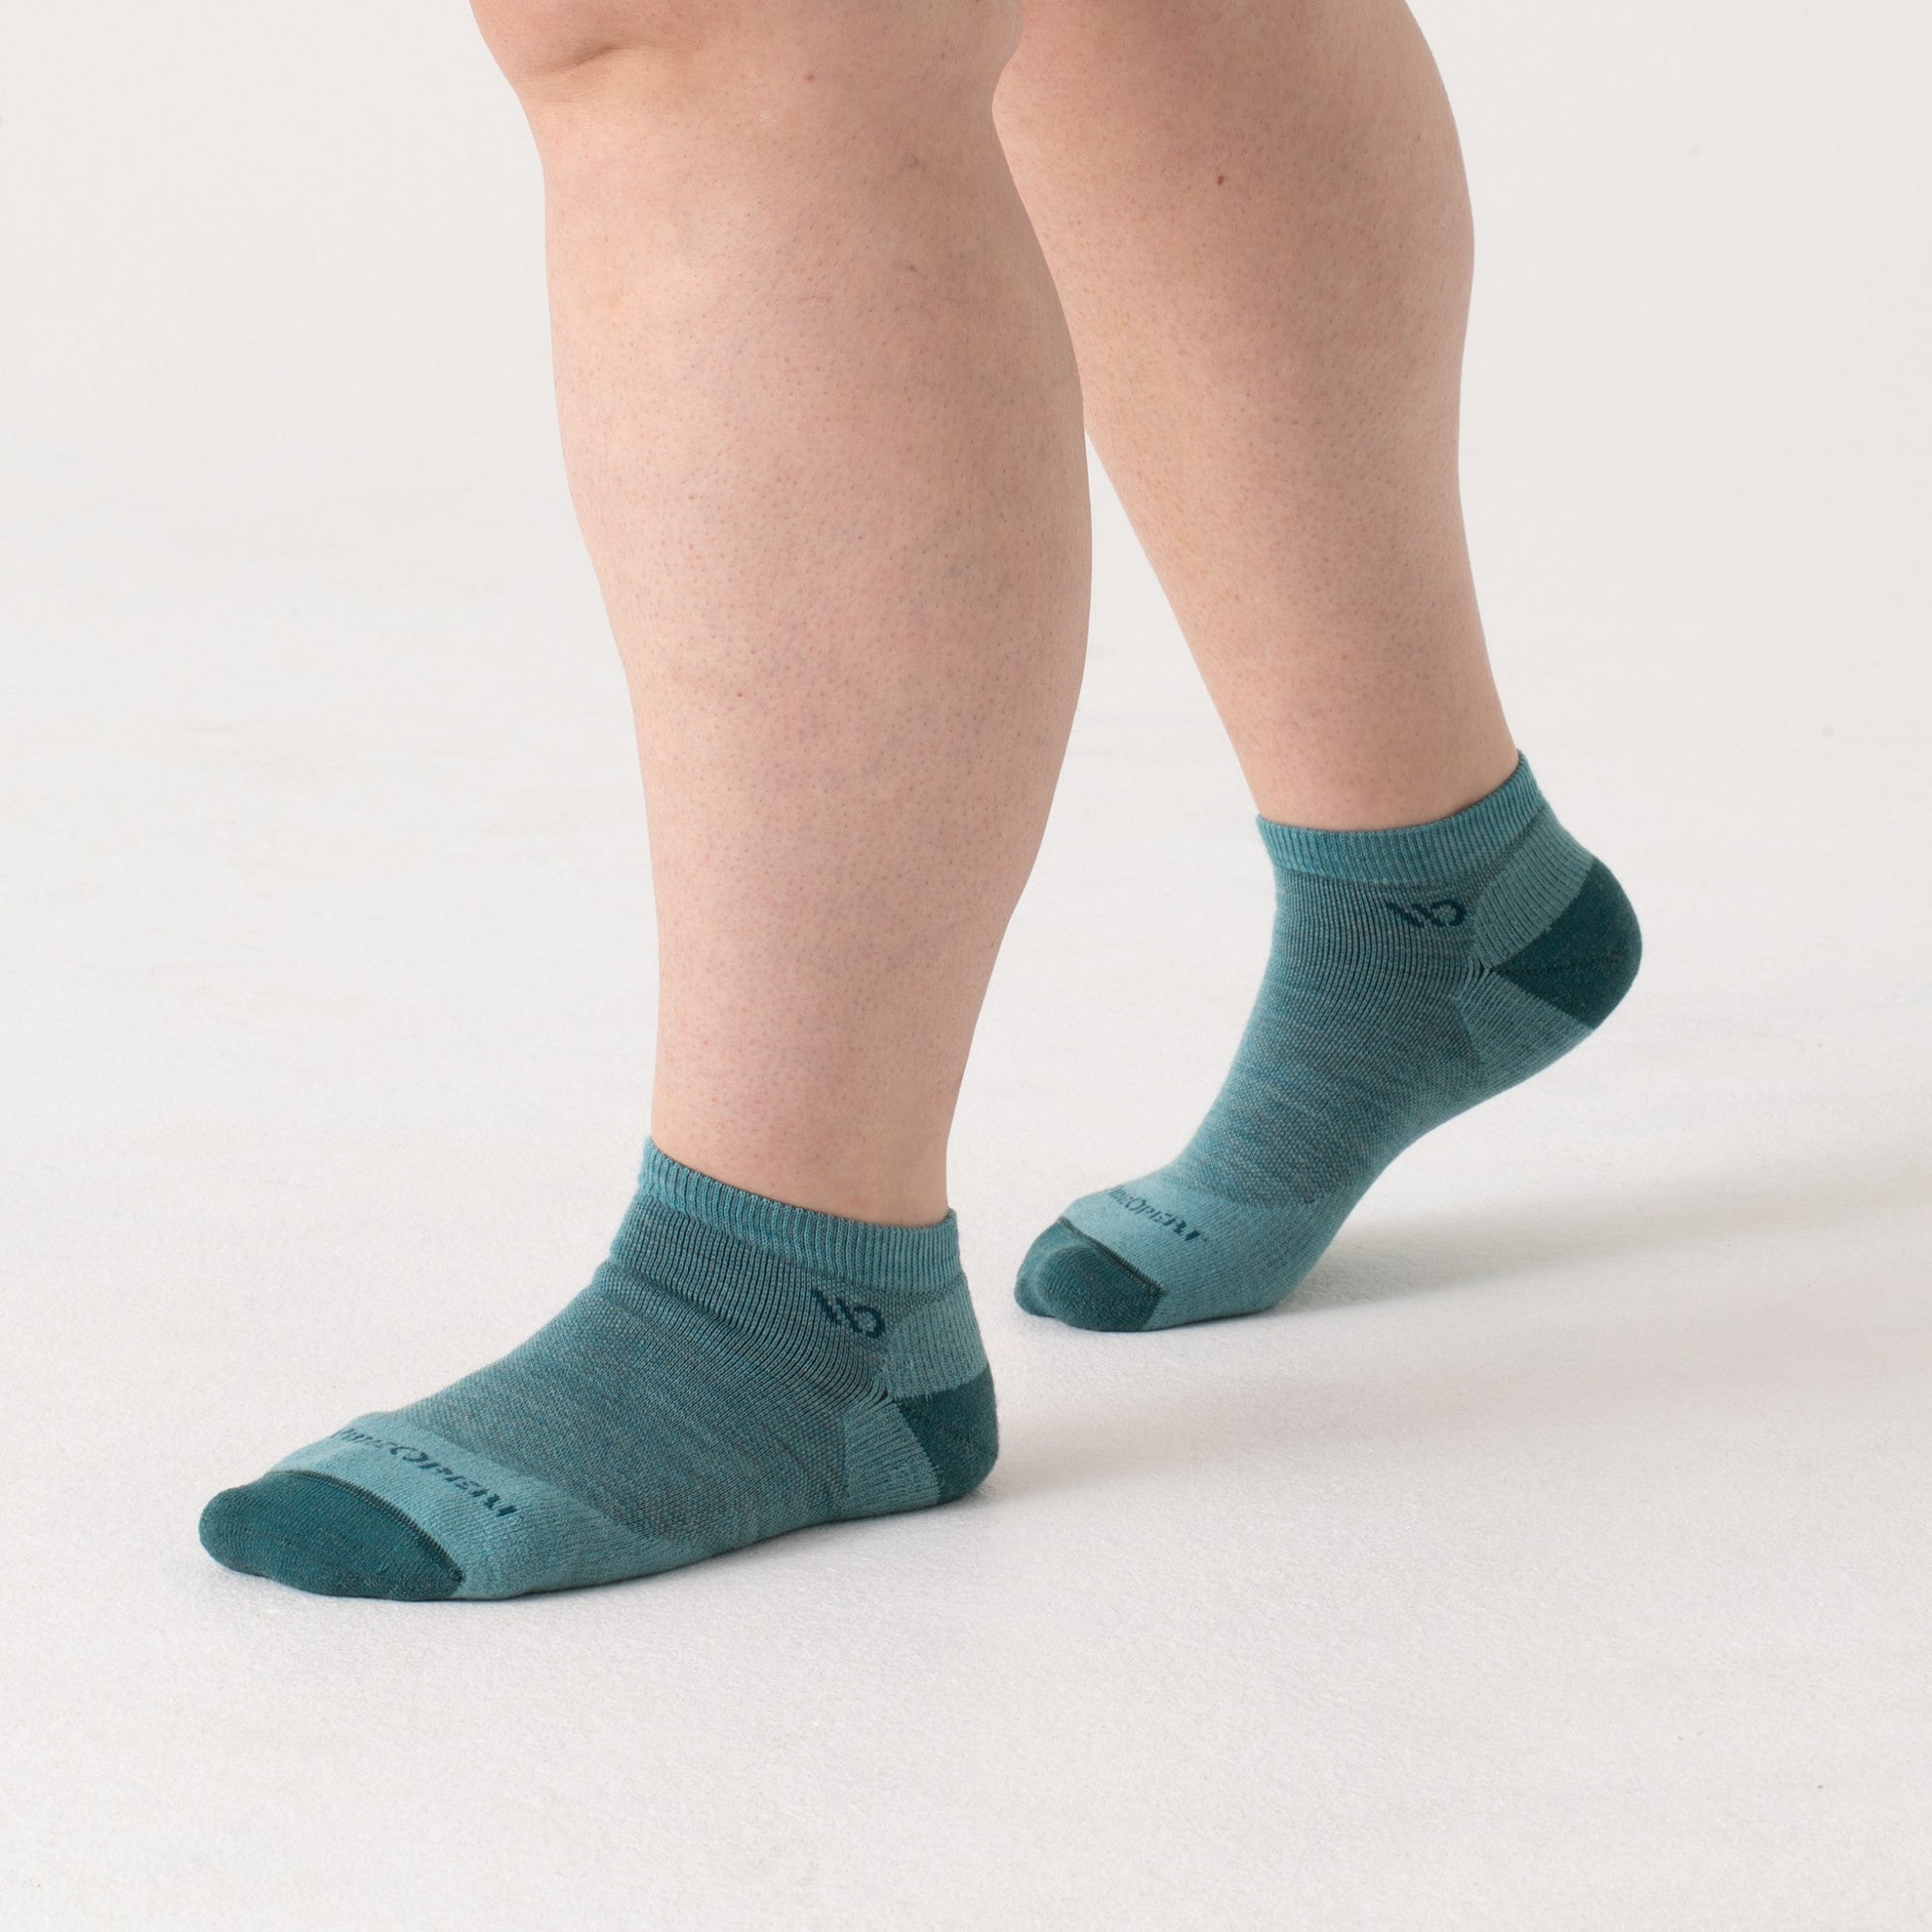 On model: No shows with dark teal heel/toe and logo, with light teal body --Light Teal/Denim/Taupe